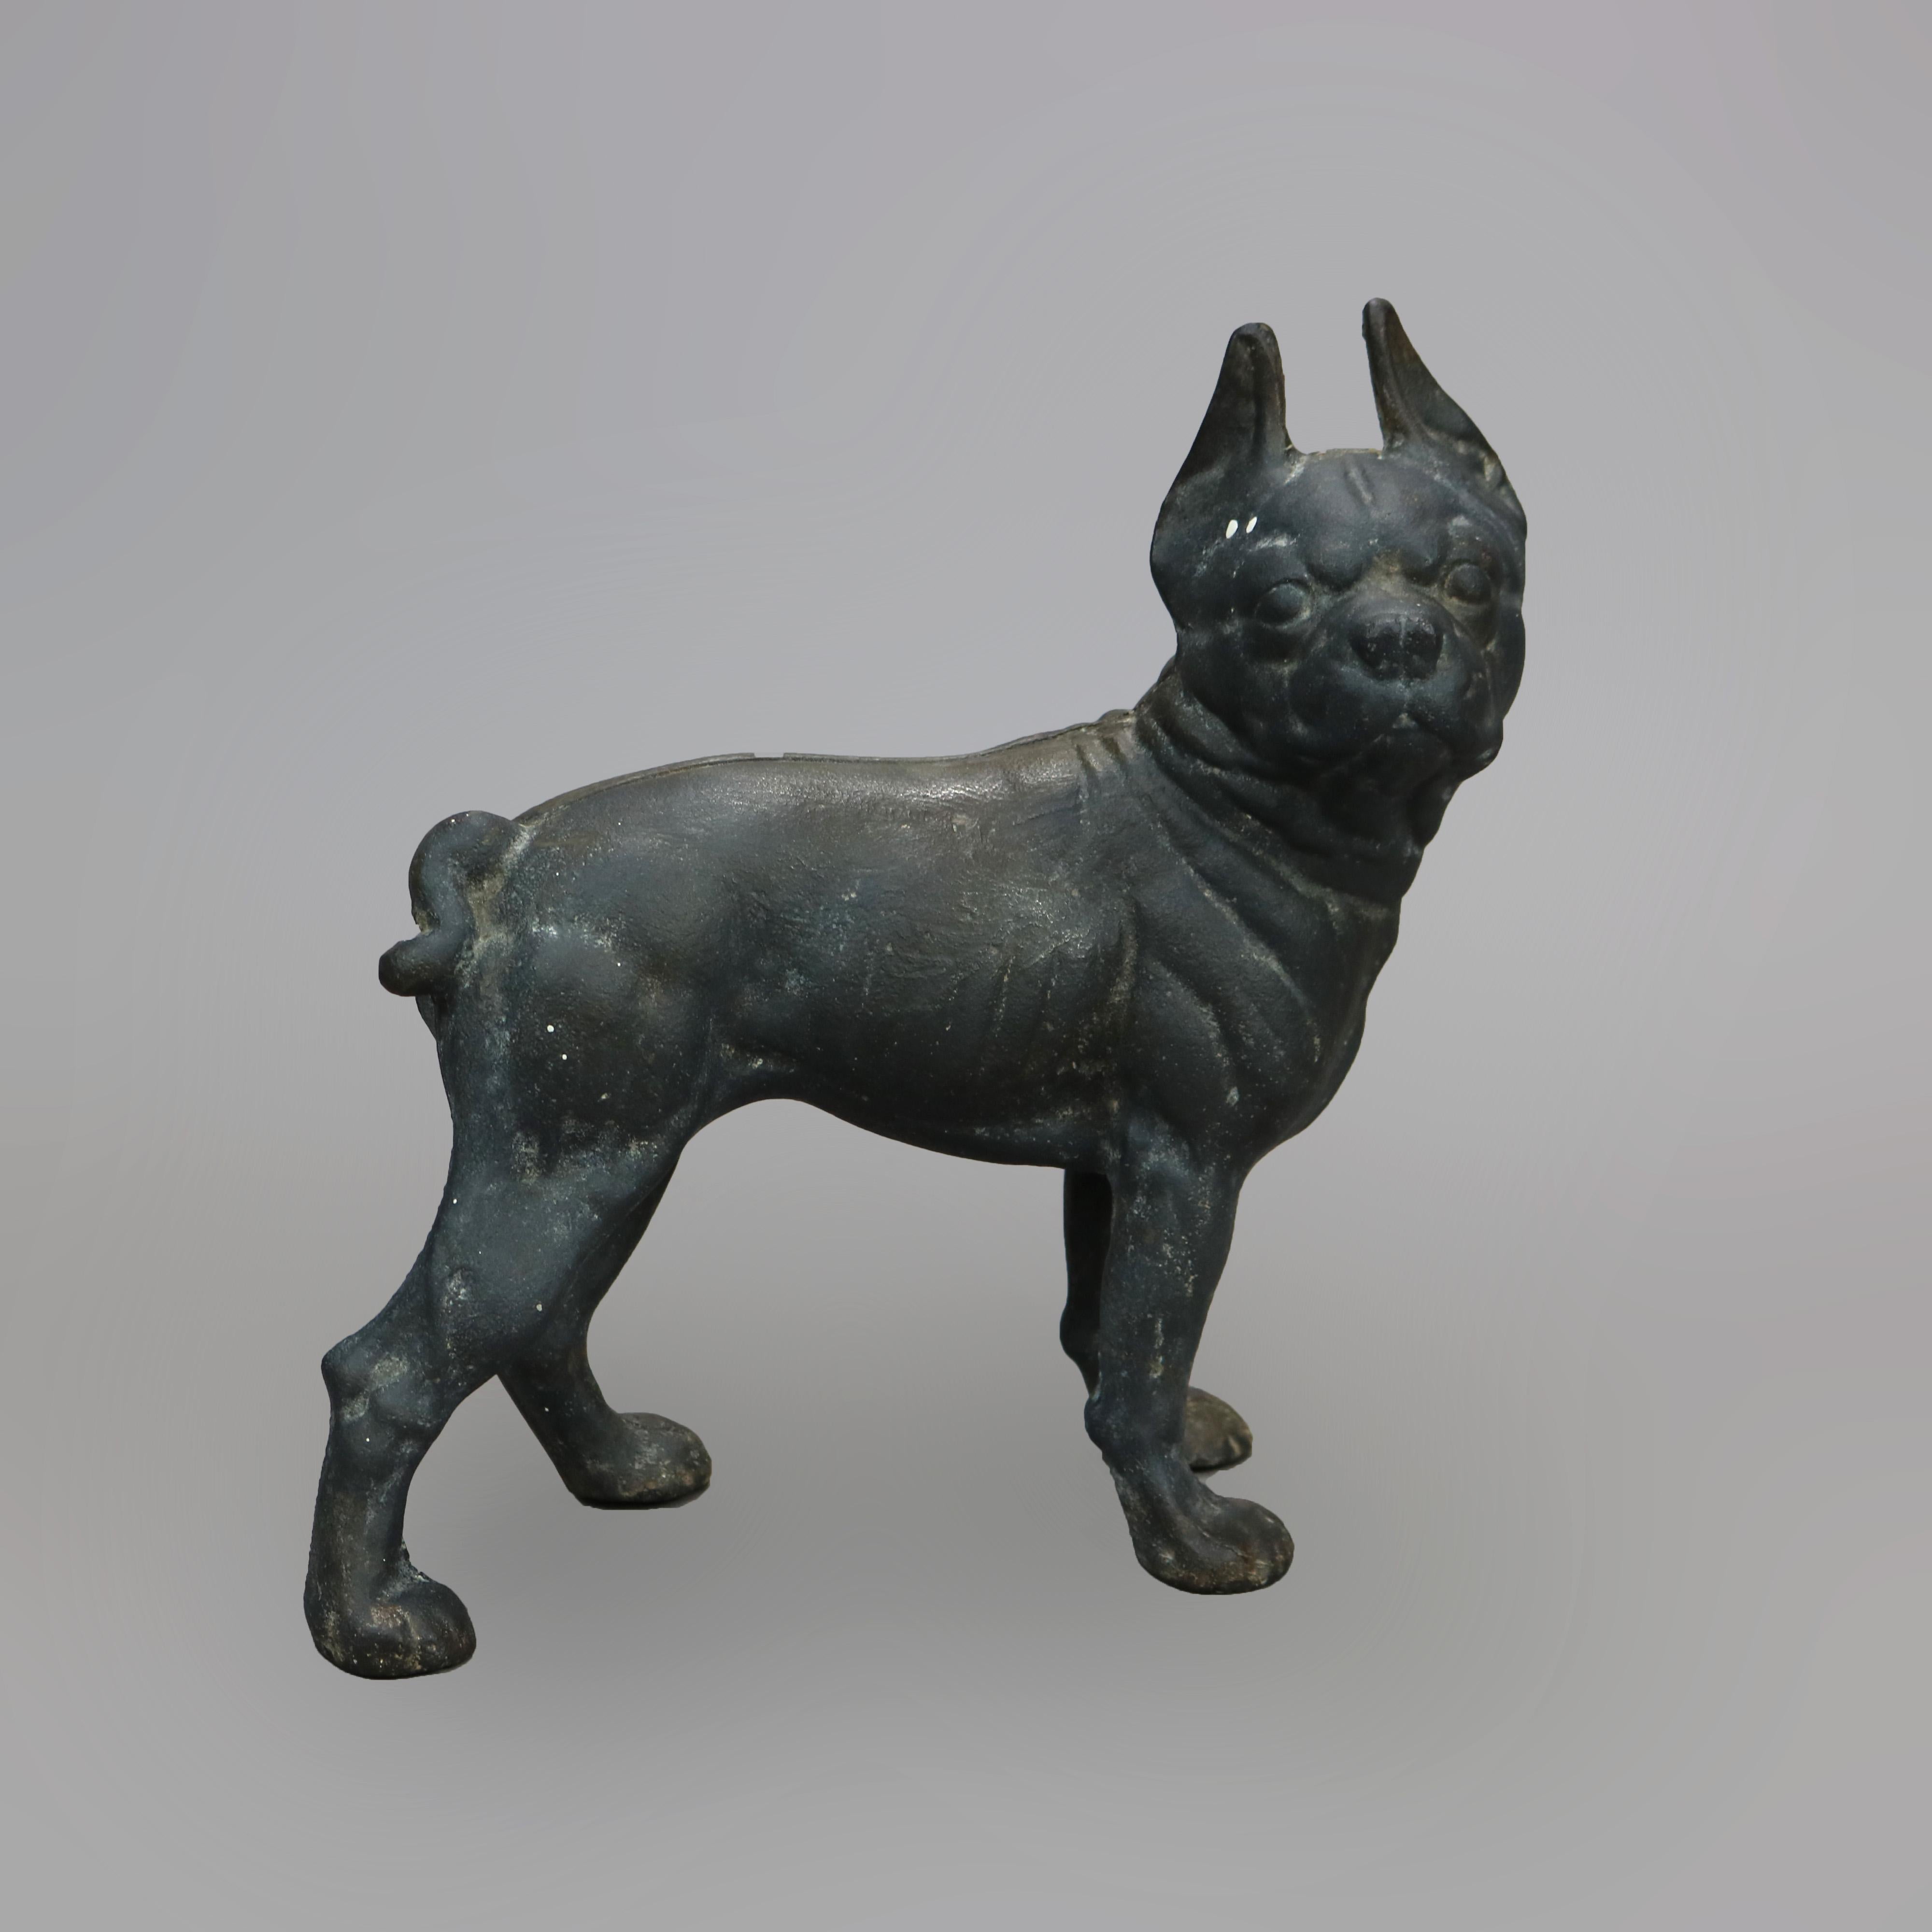 An antique figural doorstop offers cast iron construction in bulldog or pug form, c1900

Measures - 9.75''H X 4.5''W X 10''D.

Catalogue Note: Ask about DISCOUNTED DELIVERY RATES available to most regions within 1,500 miles of New York.